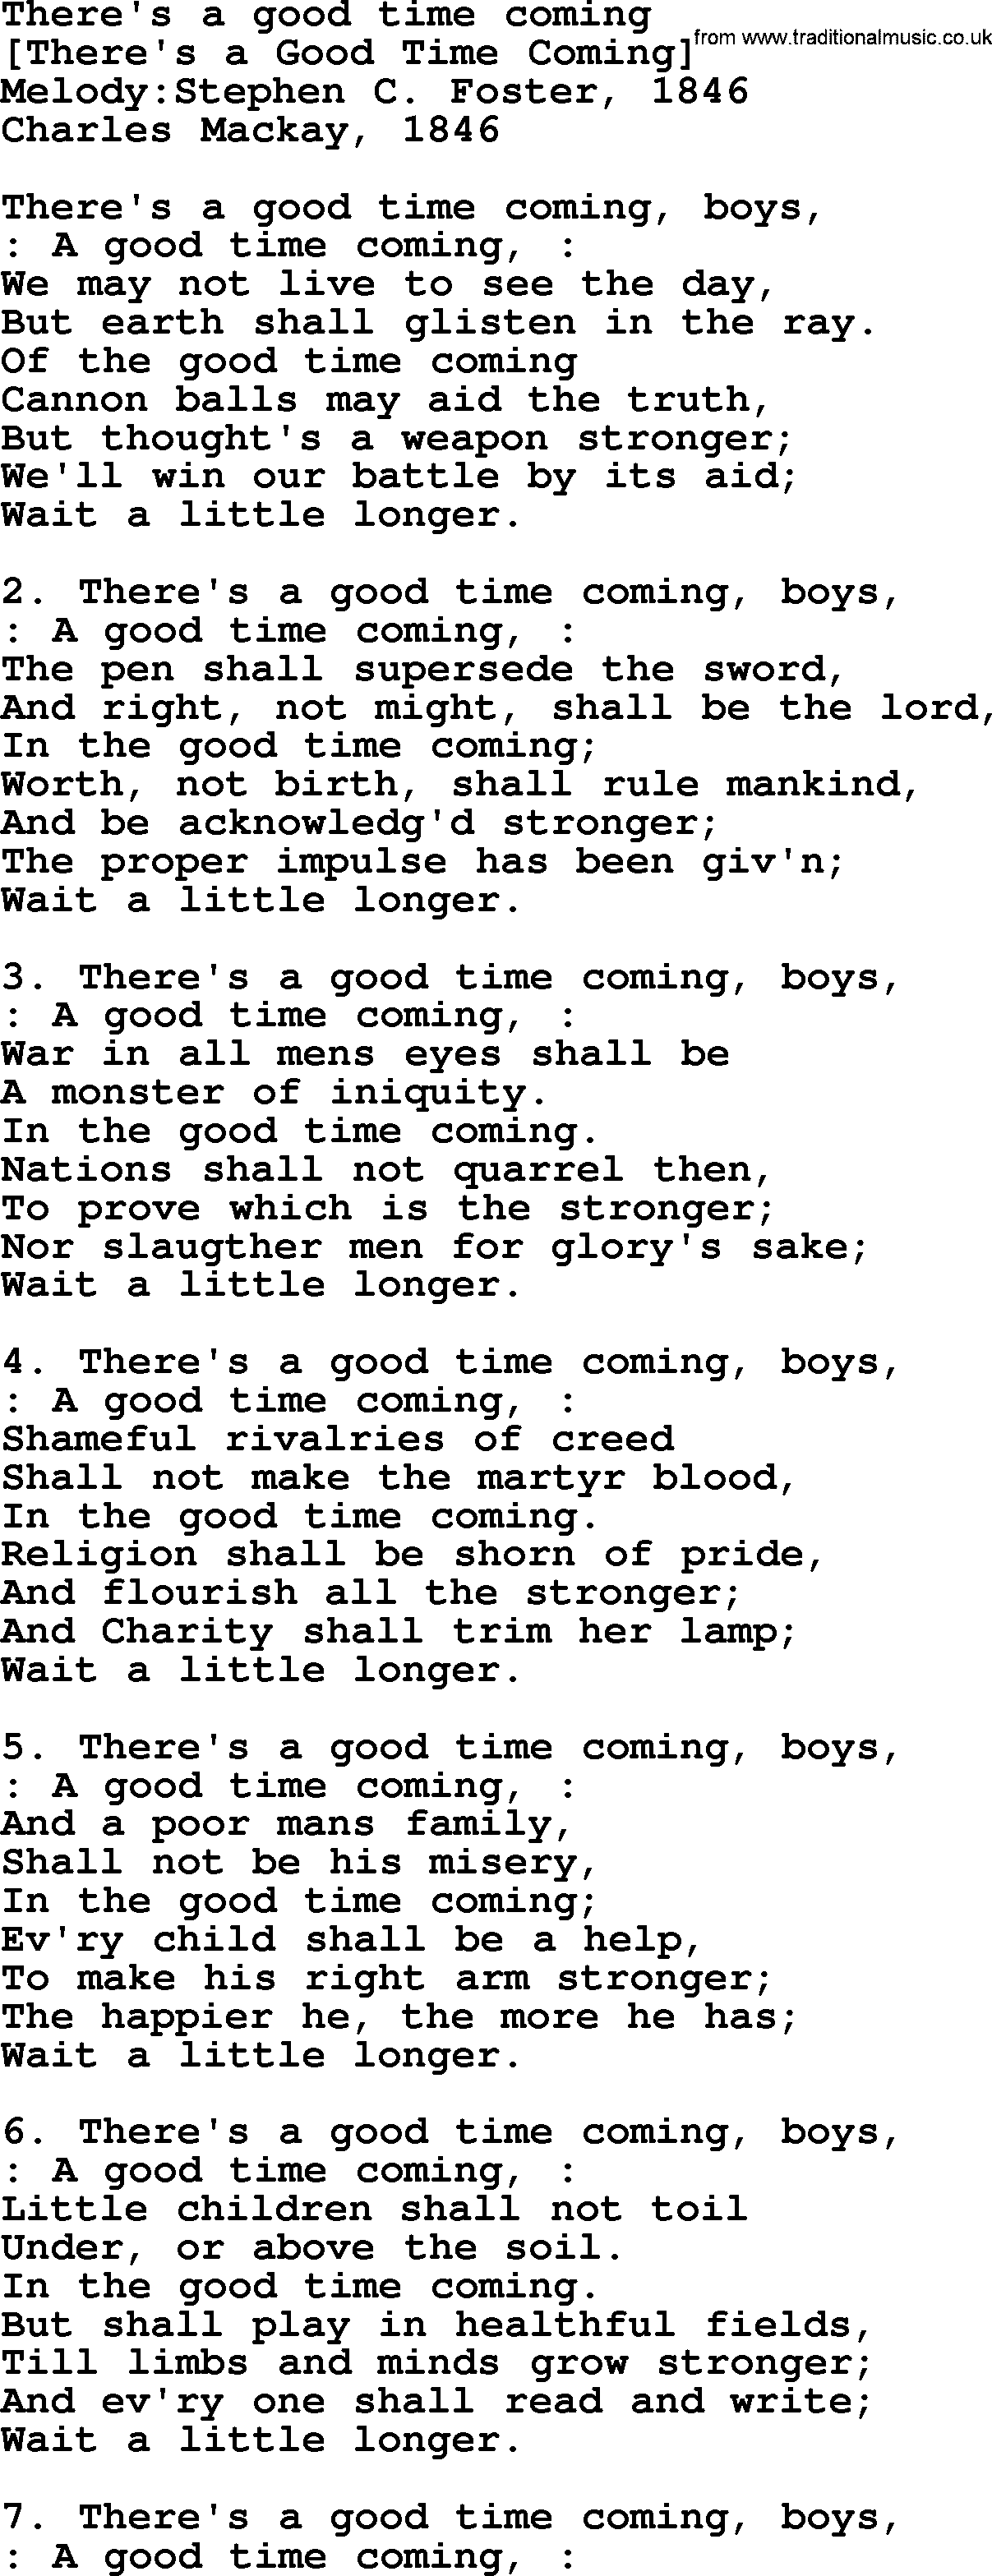 Old American Song: There's A Good Time Coming, lyrics